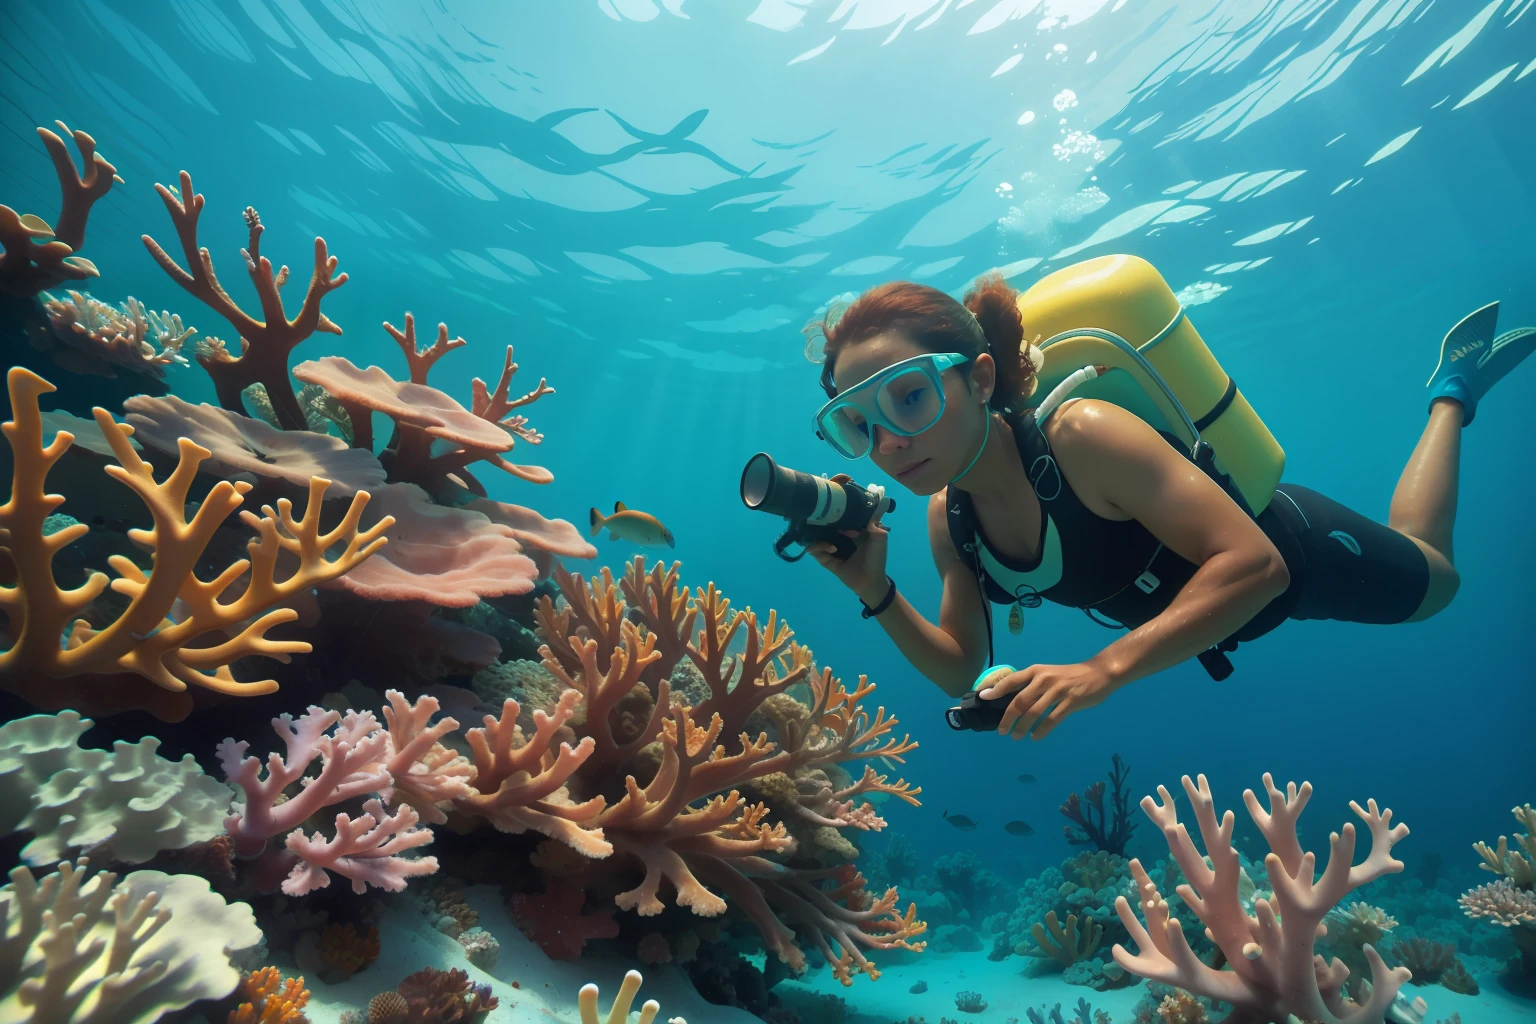 Date: 2013
Country: Bahamas
Description: an adult Bahamian marine biologist carefully studies vibrant coral reefs underwater, adding an element of environmental stewardship to the atmosphere.